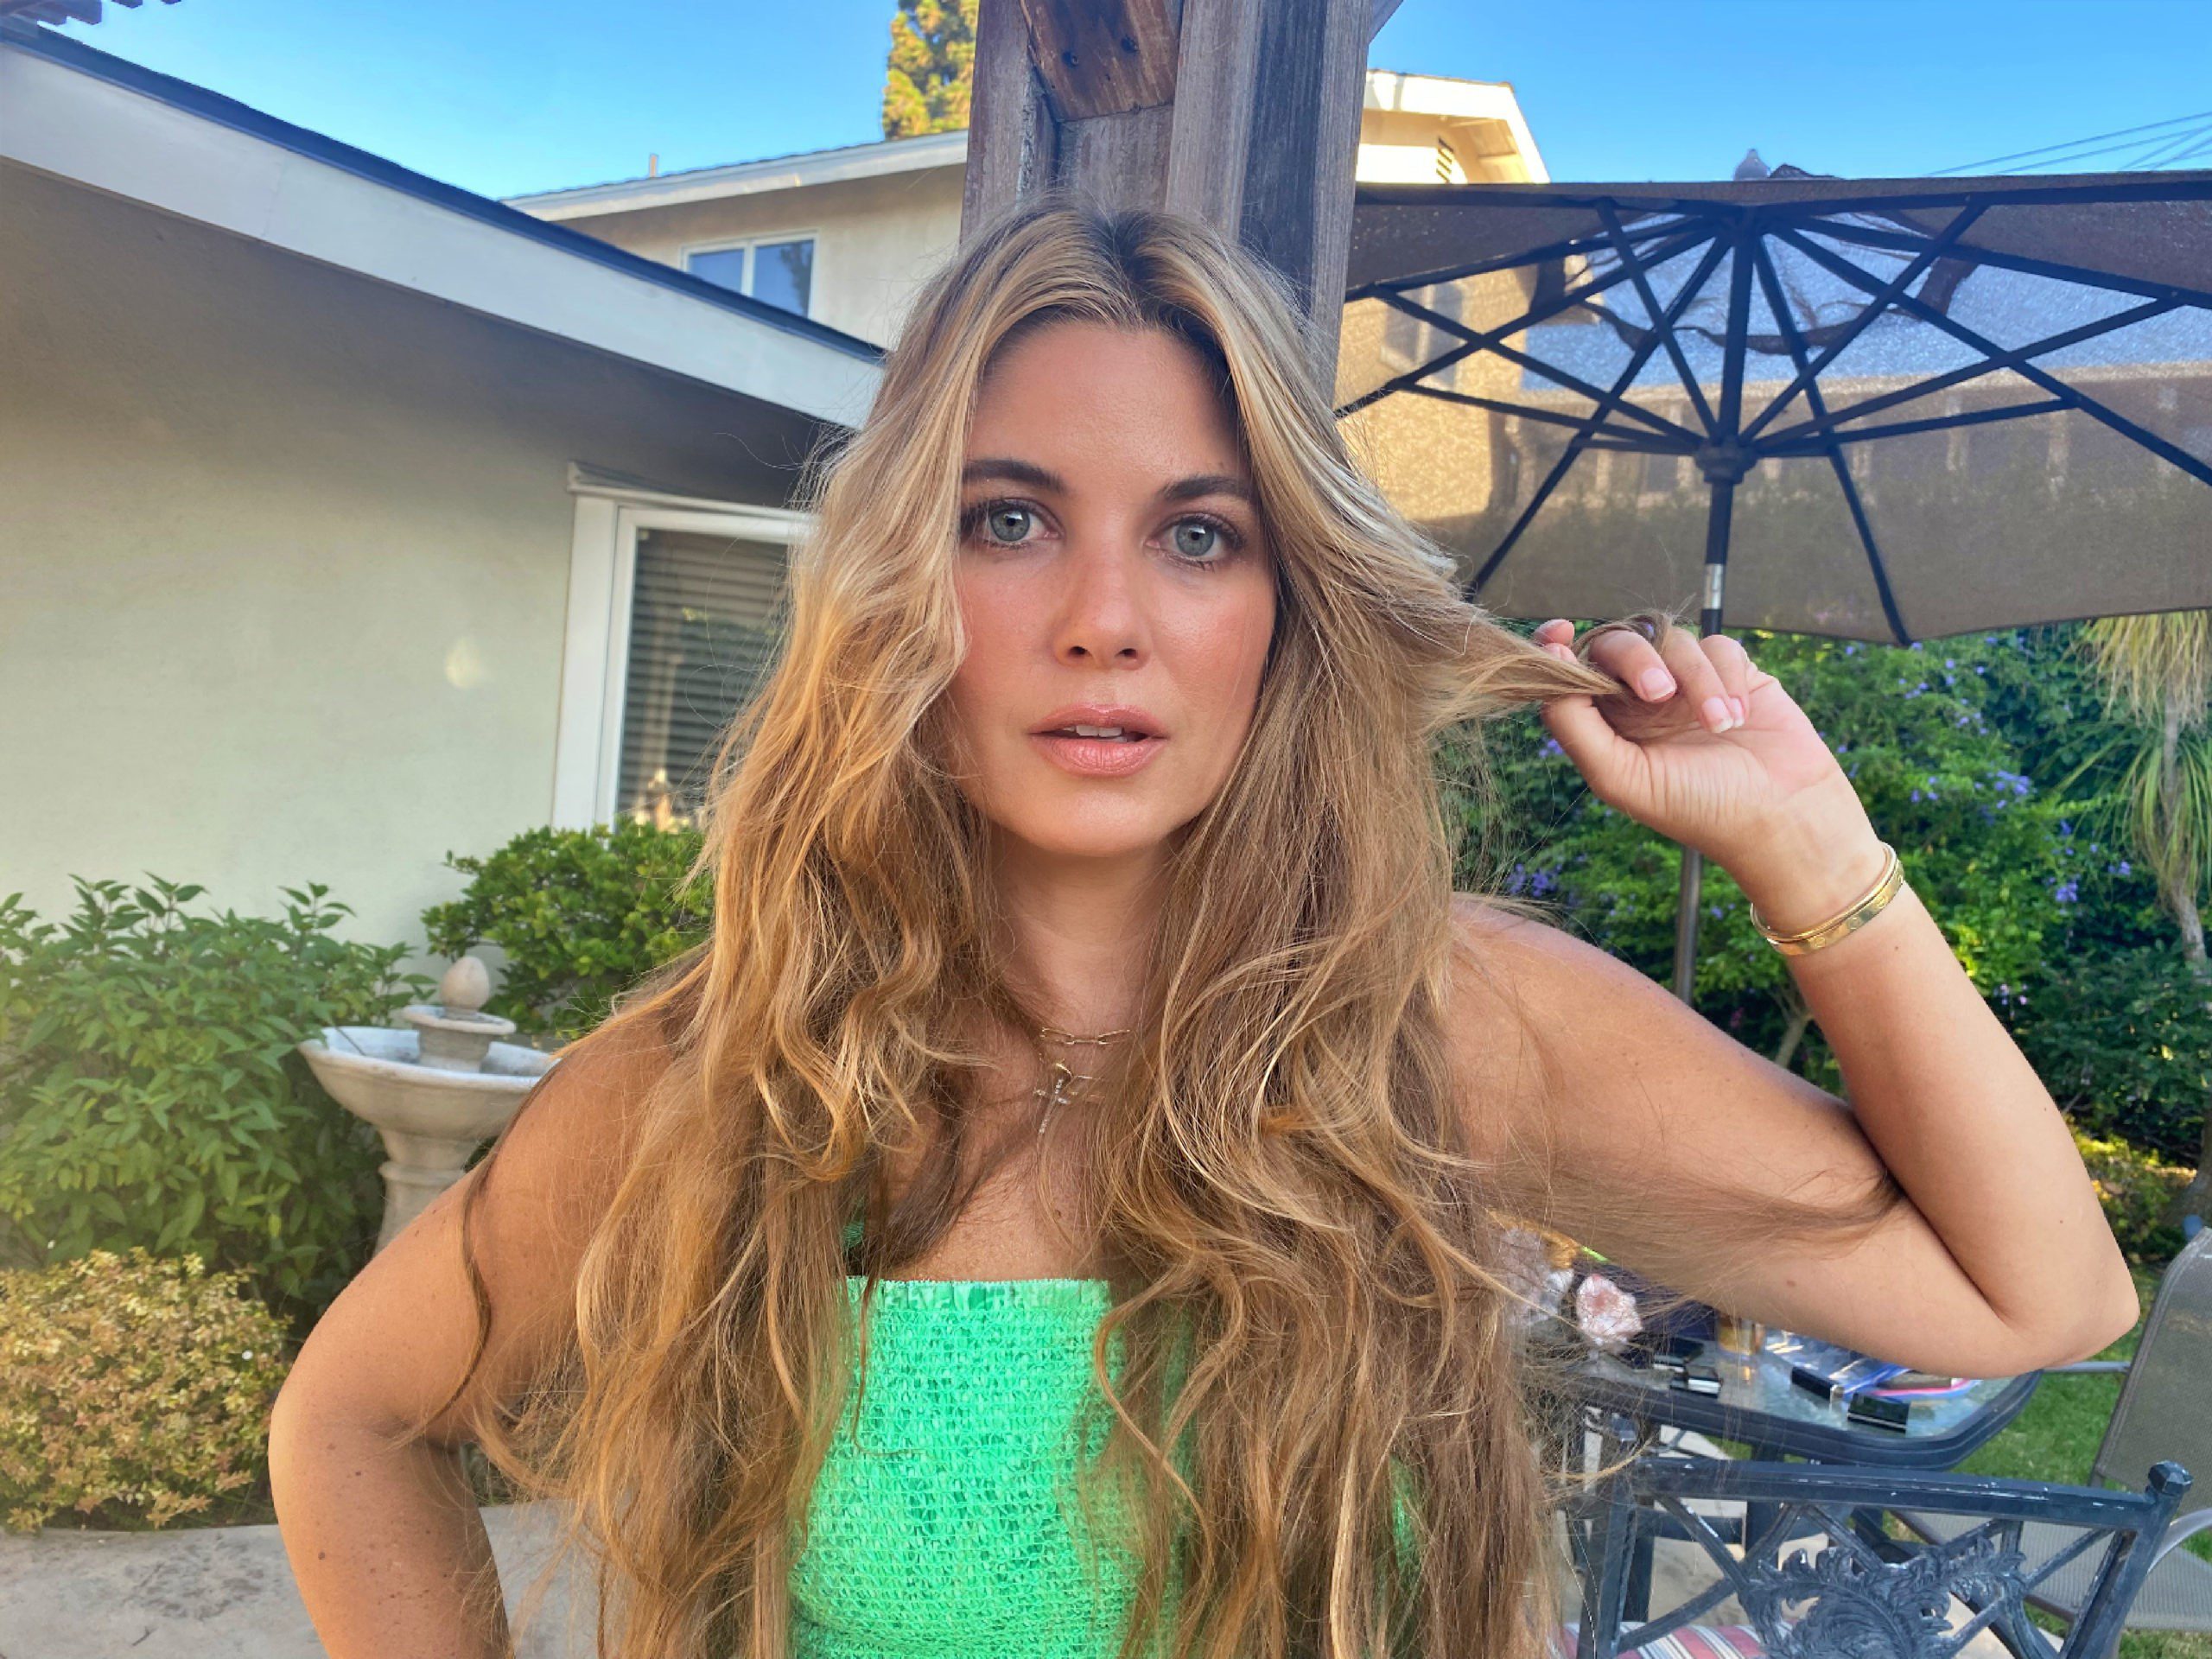 woman wearing green top and holding her hair